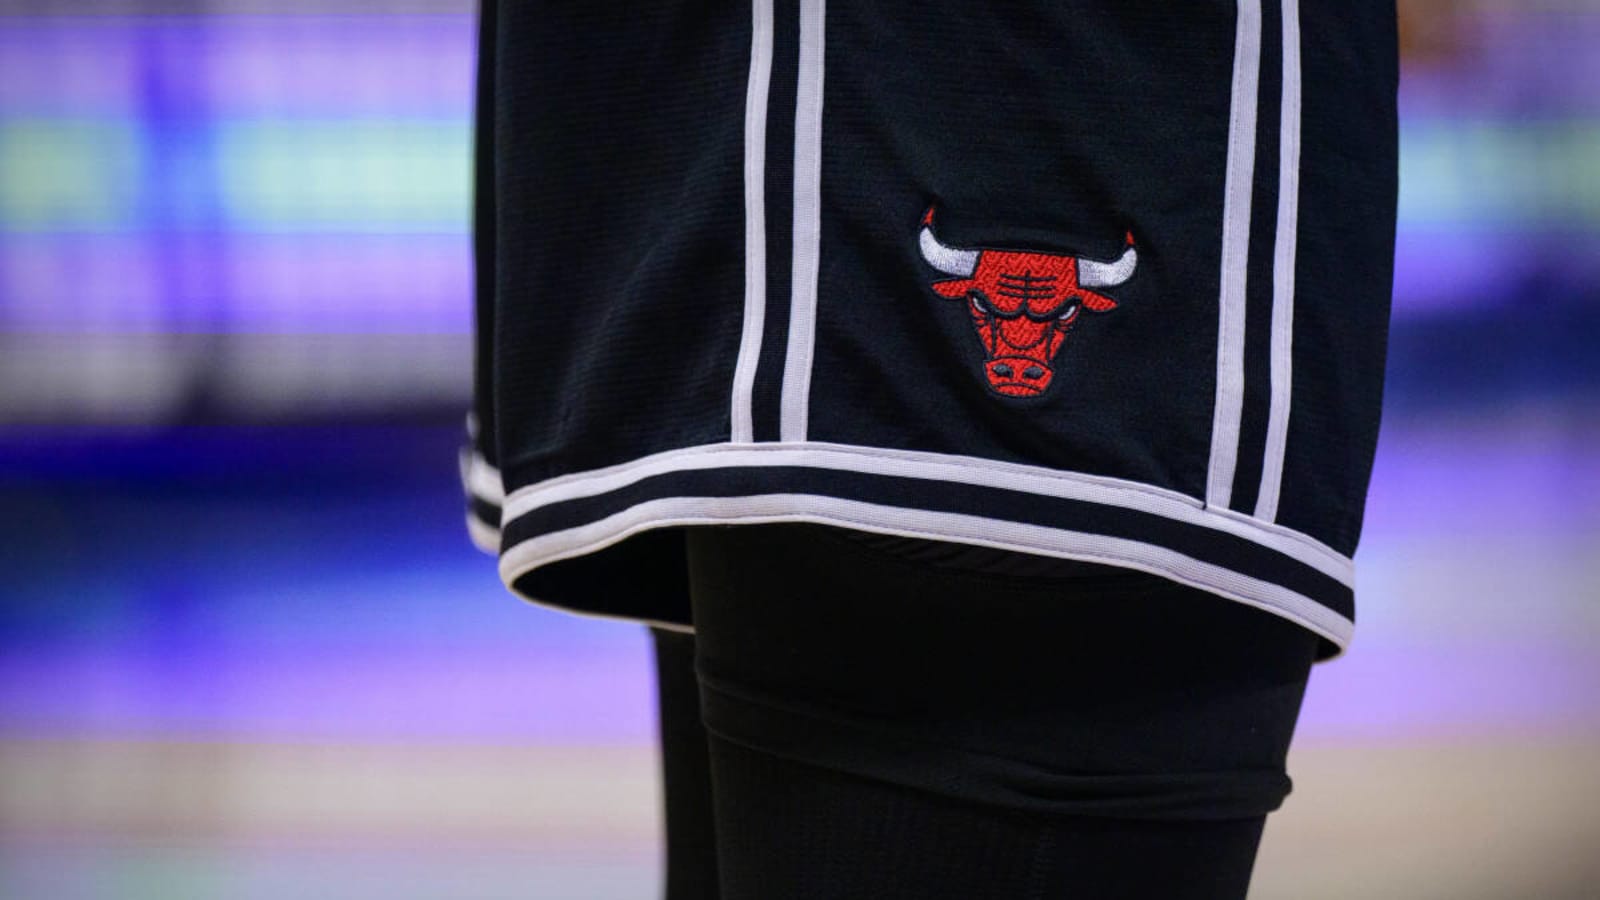 Can a Chicago Bull win an individual award at the end of the season?